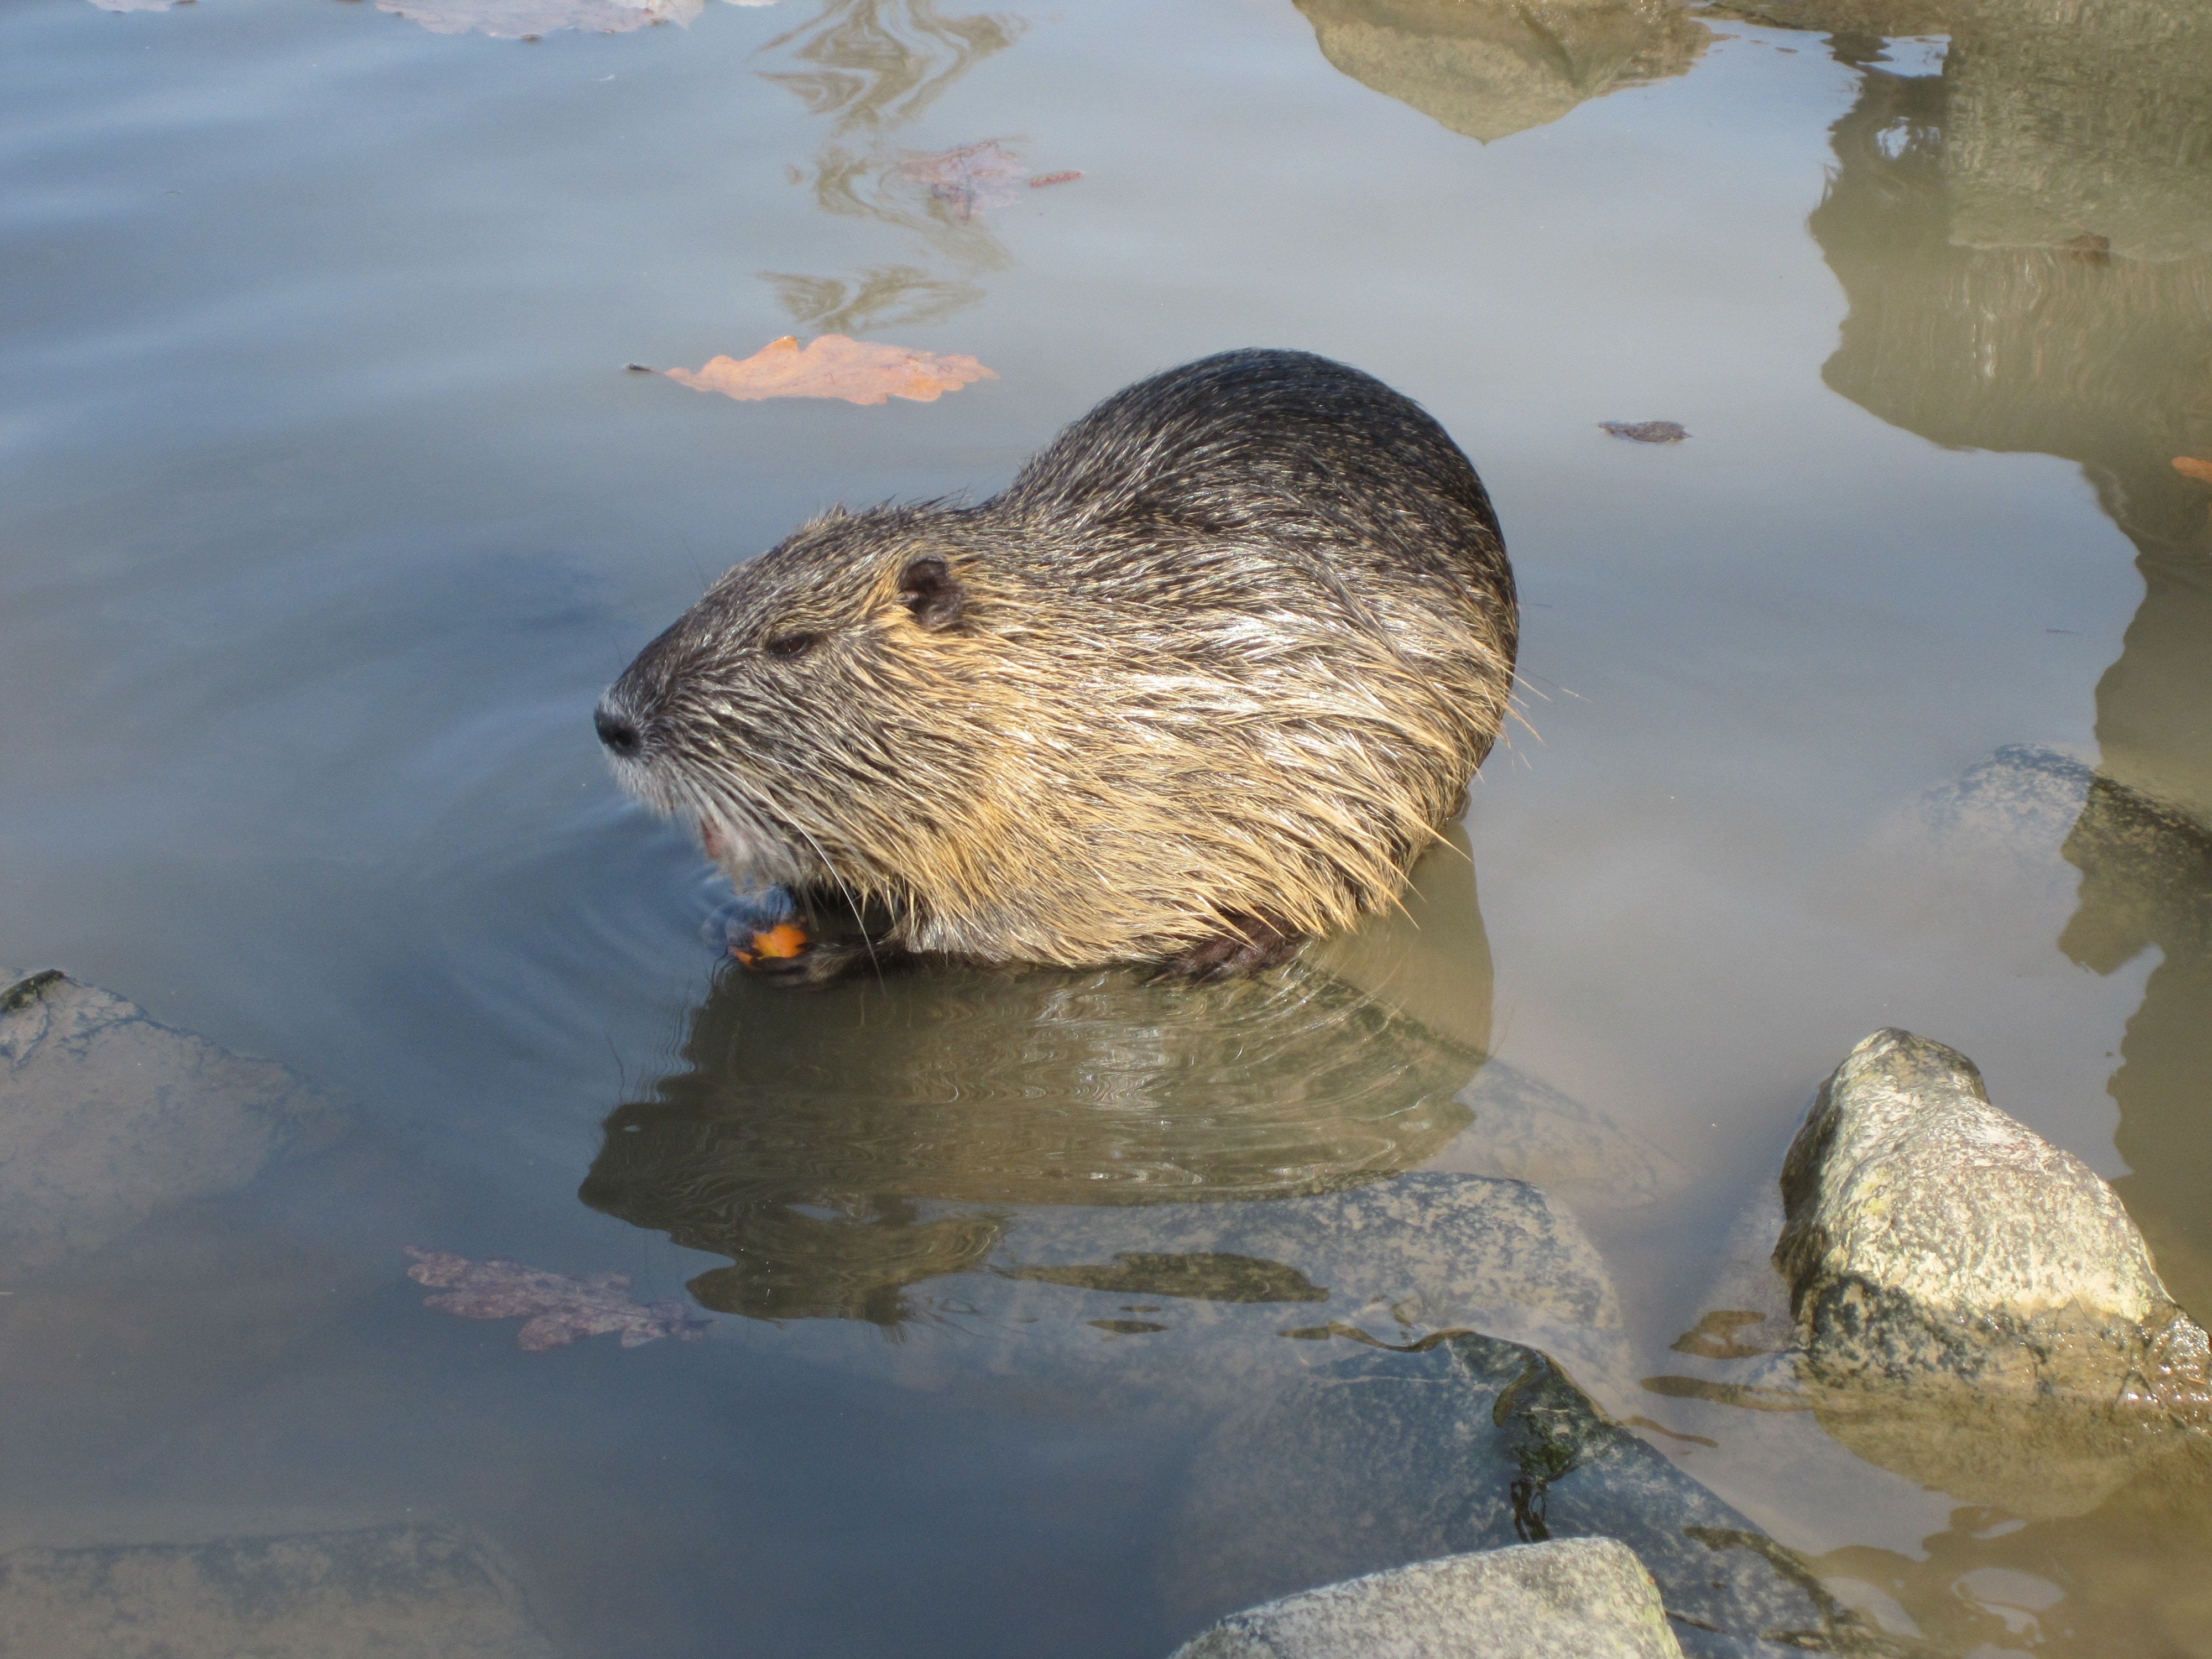 grey rodent in water during daytime